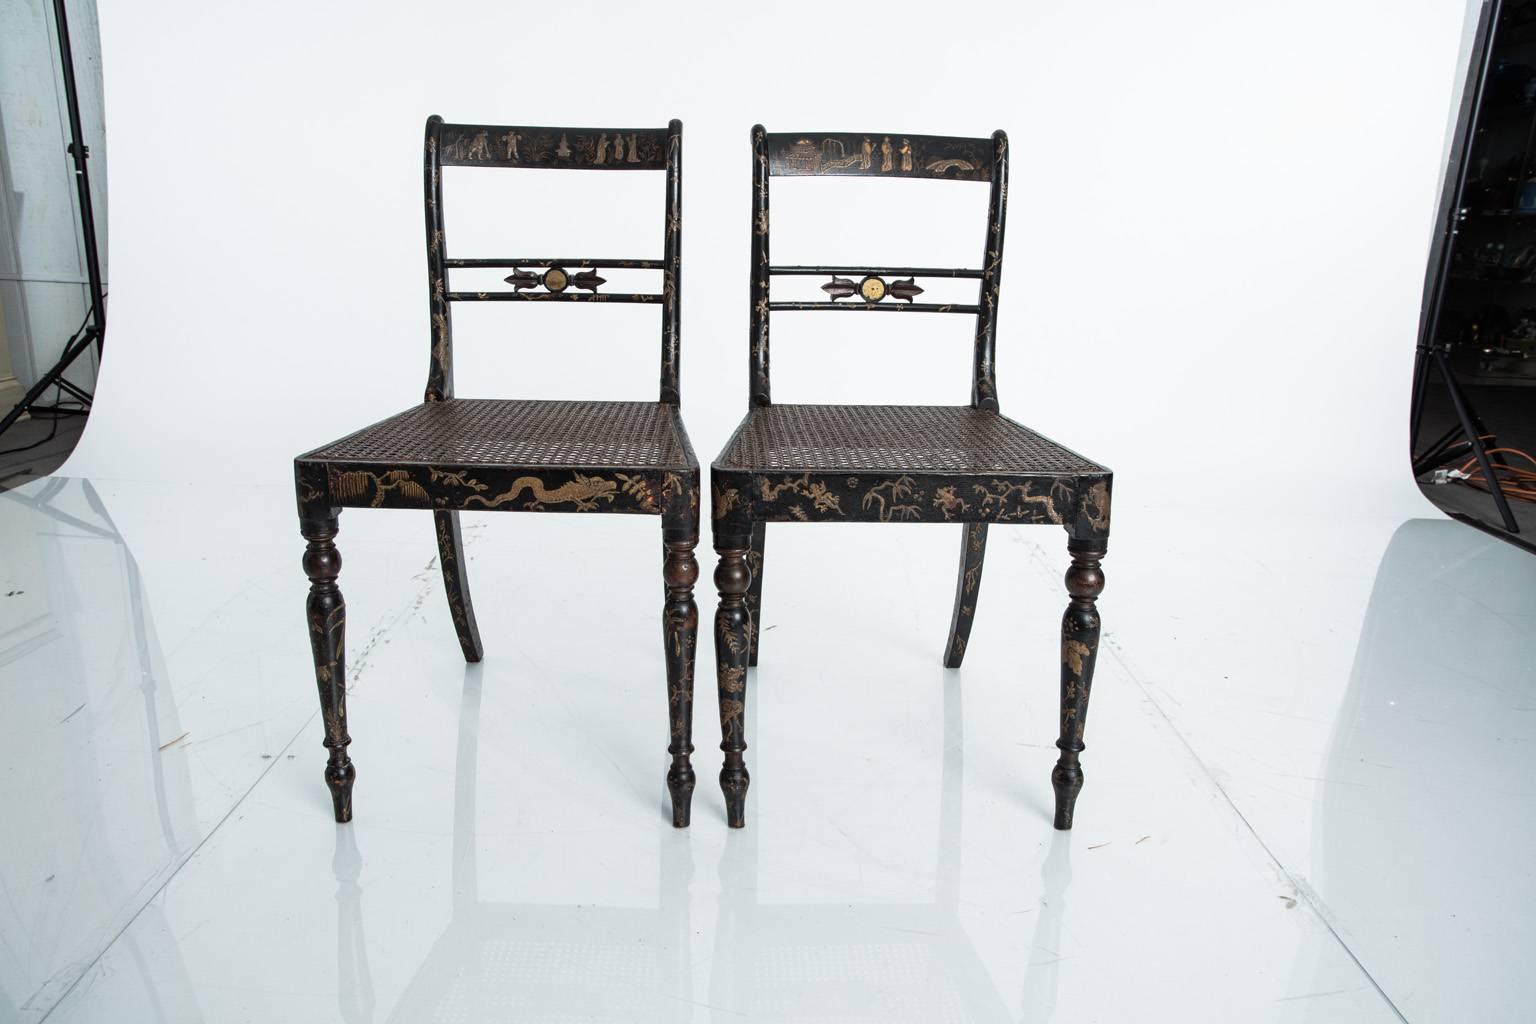 19th century pair of beautifully decorated Regency style side chairs with cane seats.